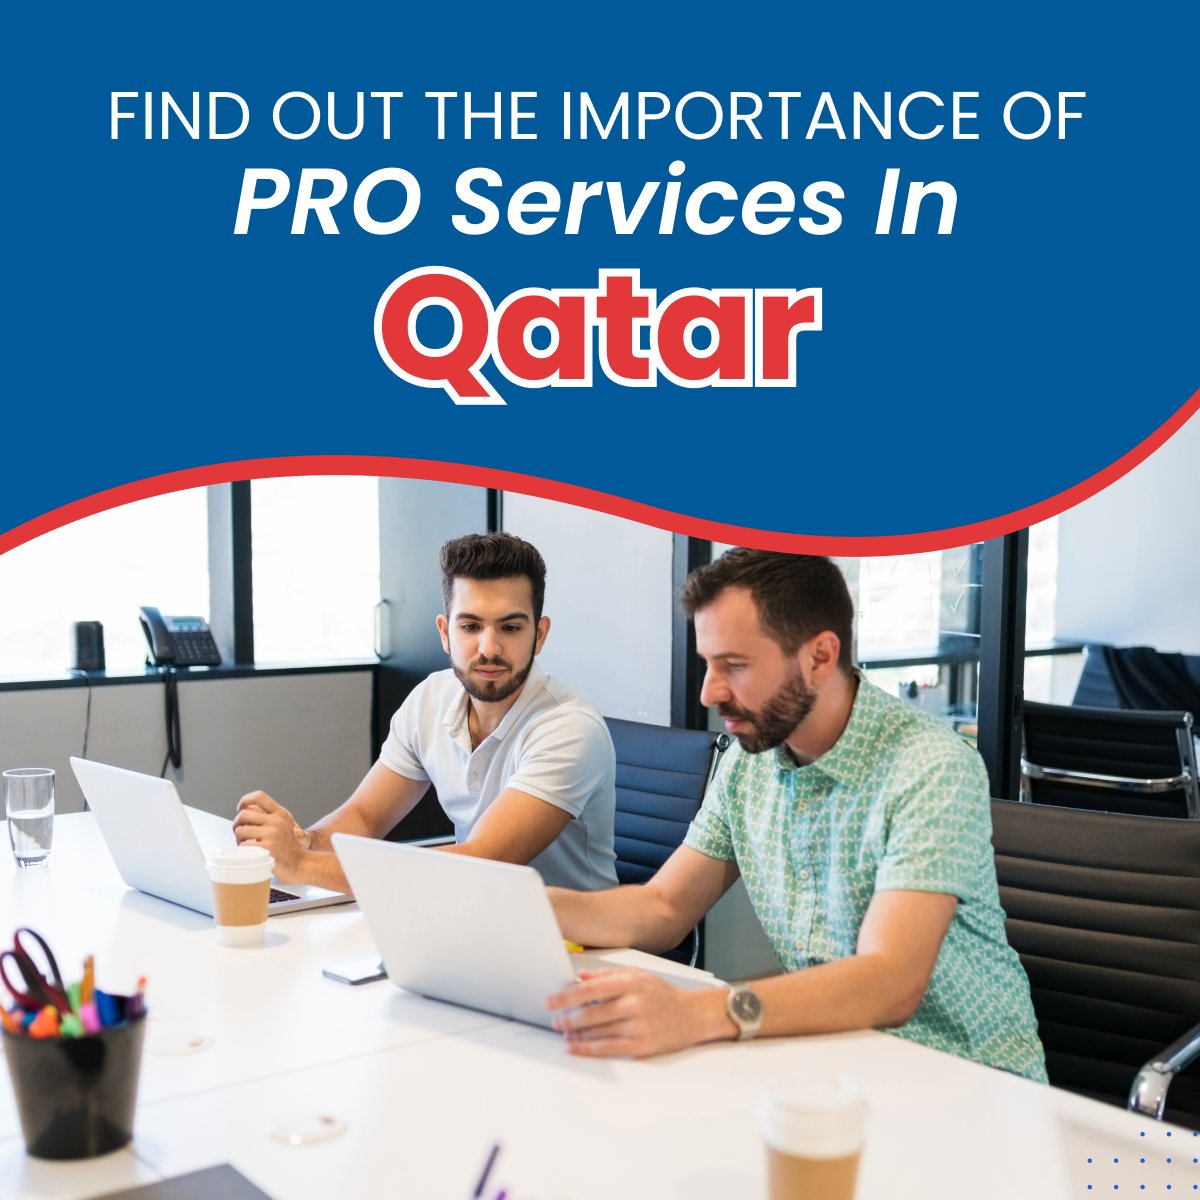 Find Out the Importance Of PRO Services In Qatar